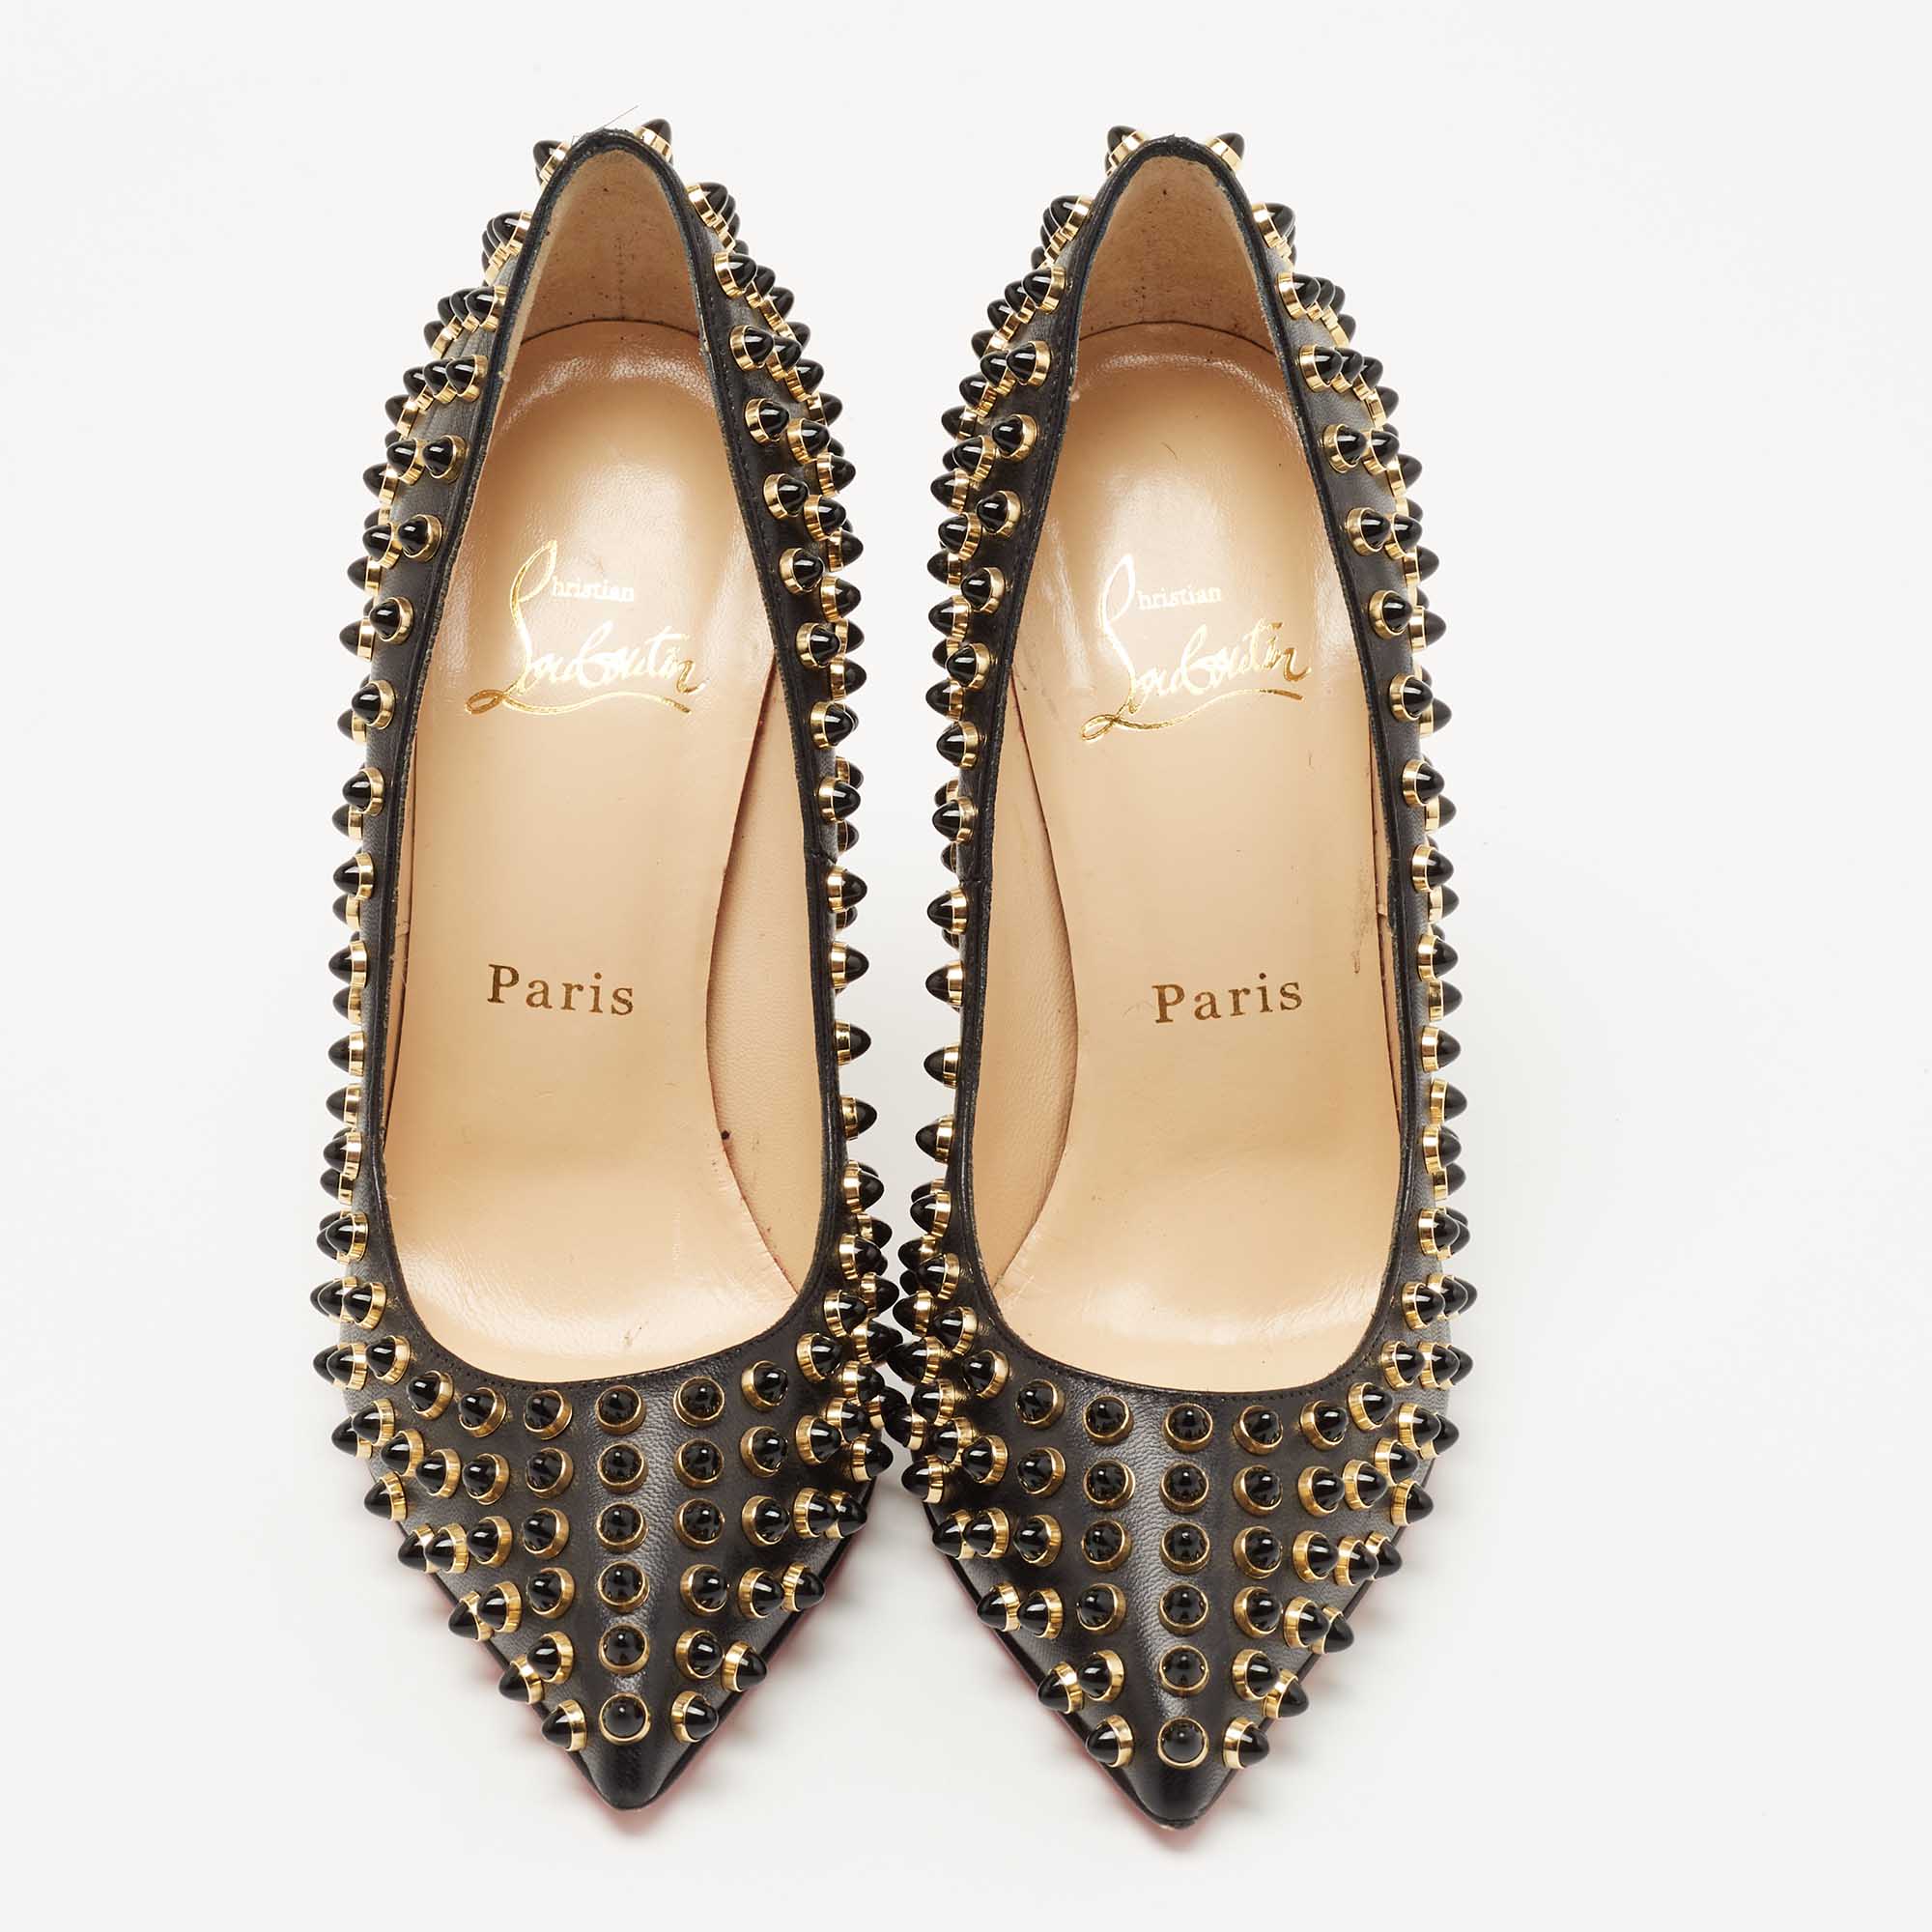 Christian Louboutin Black Leather Studded Follies Cabo Pumps Size 34.5